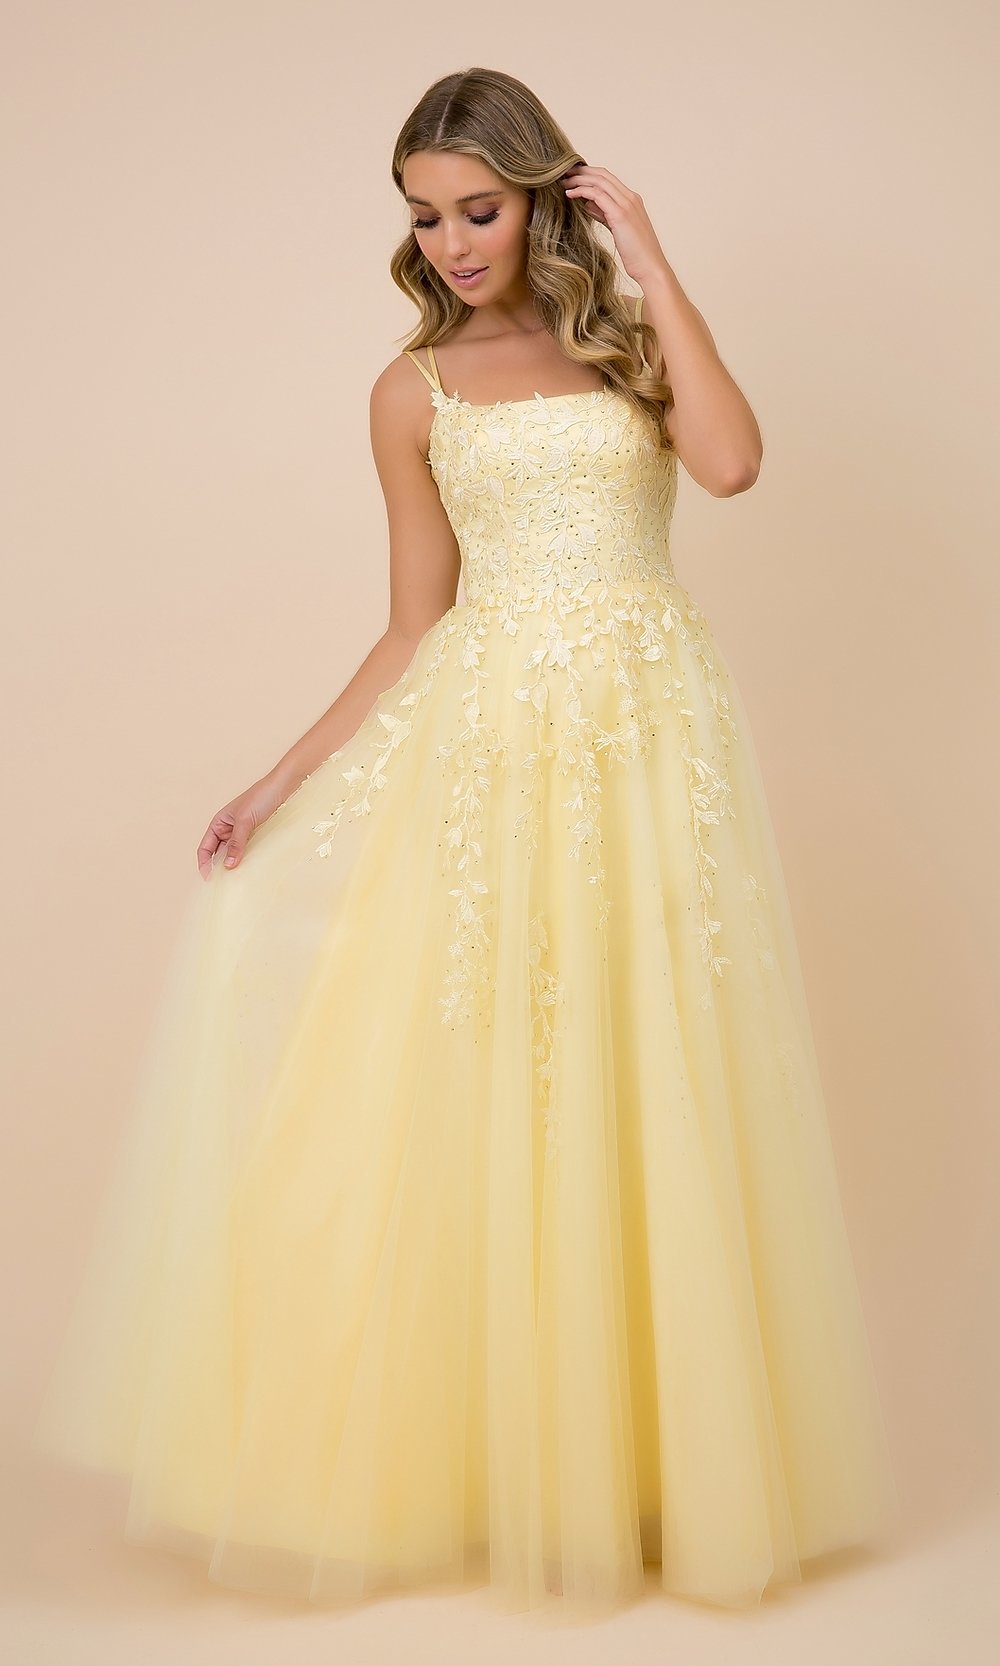 Lemon Embroidered Strappy-Back Tulle Ball Gown for Prom